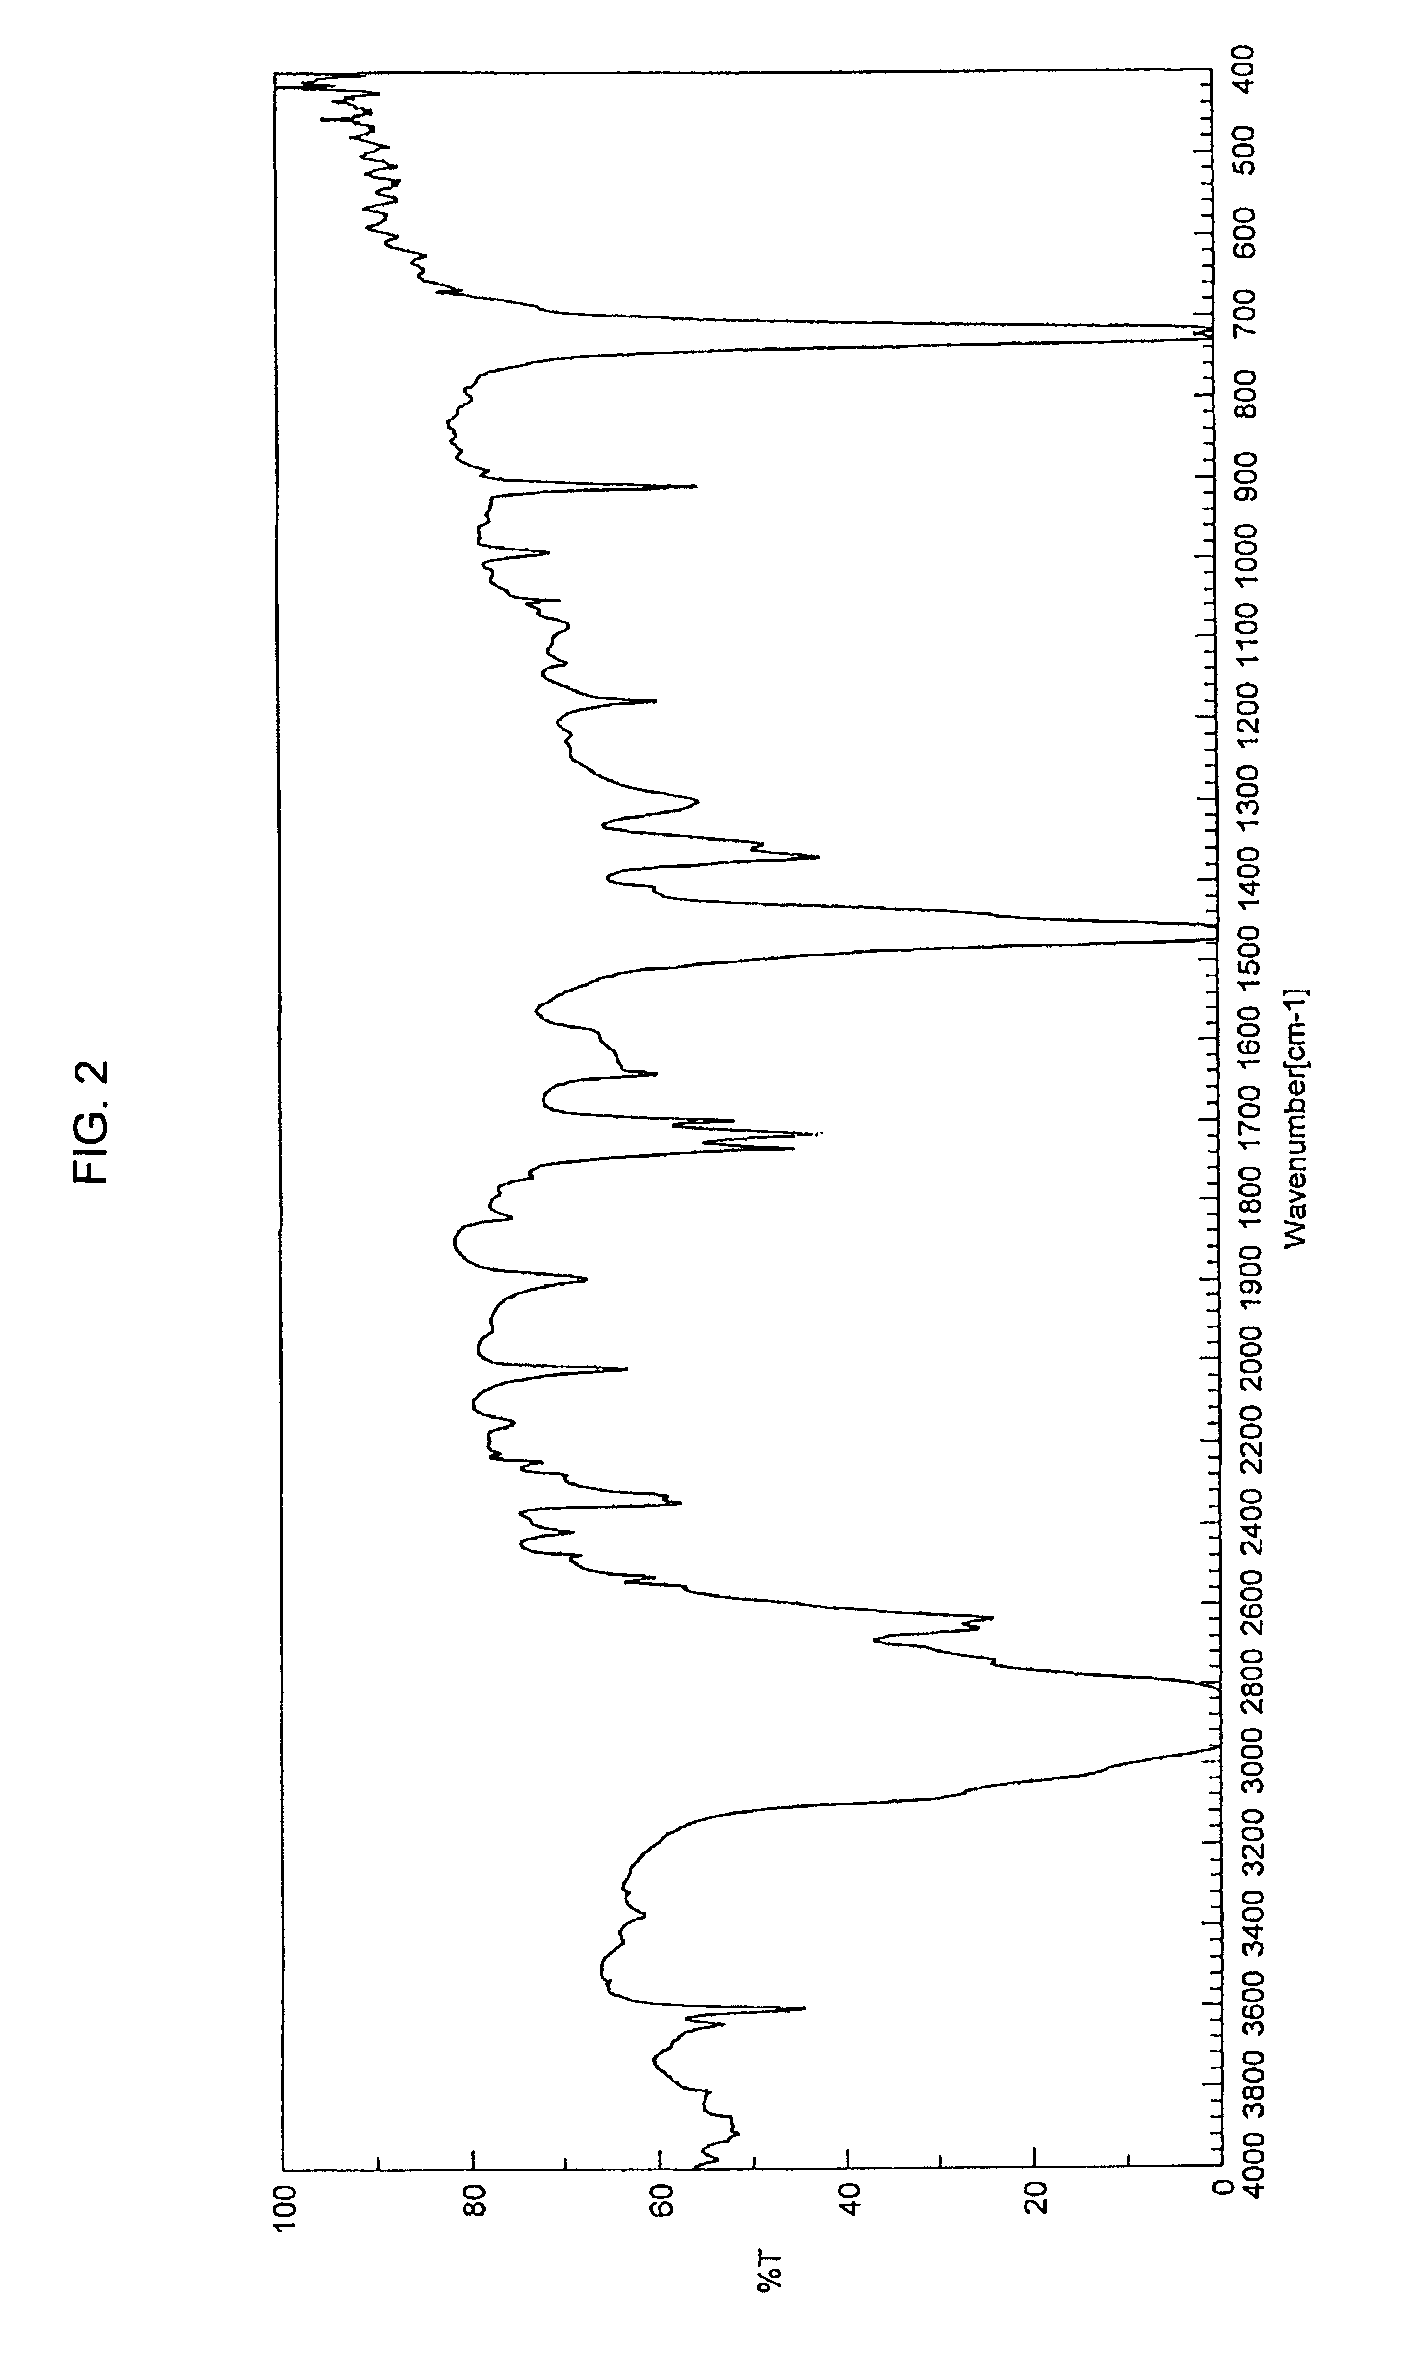 Ethylene-based polymer microparticles, functional group-containing ethylene-based polymer microparticles, and catalyst carriers for manufacture thereof